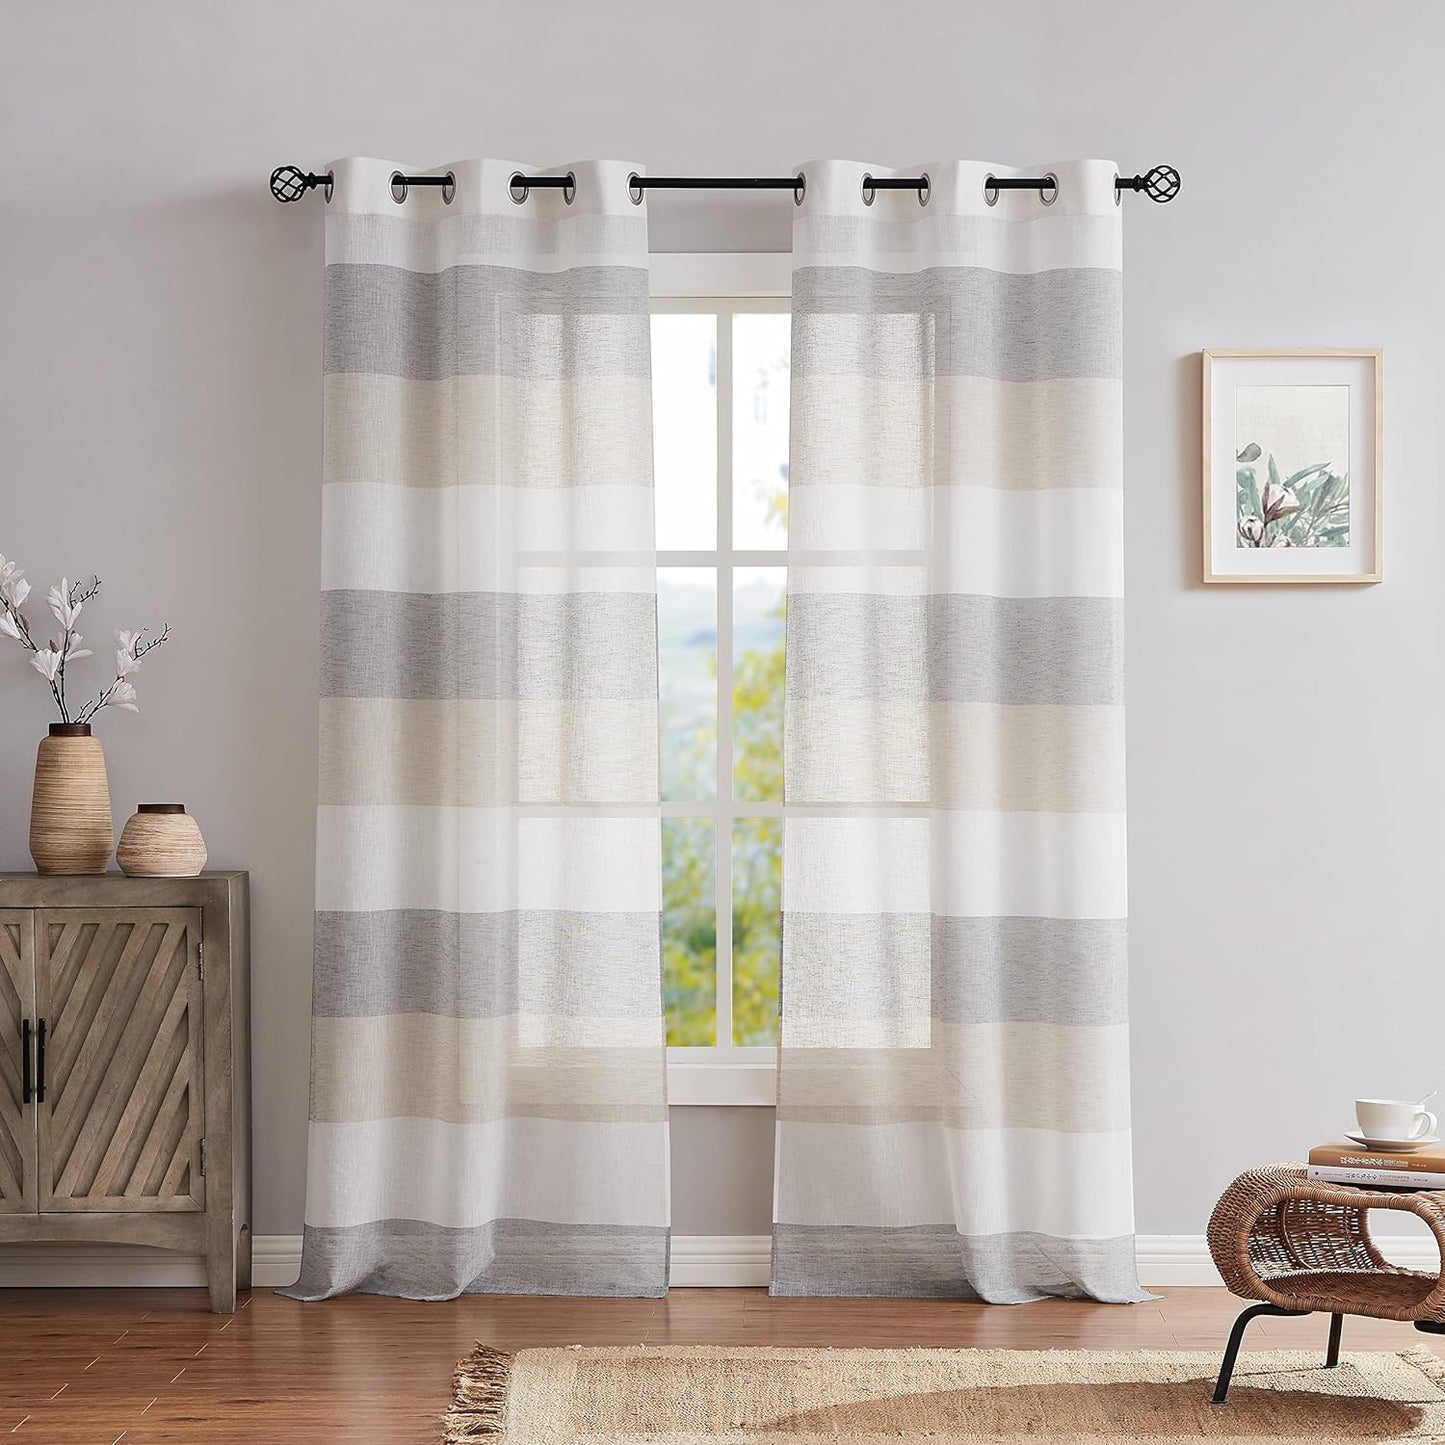 Central Park Gray Tan Stripe Sheer Color Block Window Curtain Panel Linen Window Treatment for Bedroom Living Room Farmhouse 84 Inches Long with Grommets, 2 Panel Rustic Drapes  Central Park Gray/Tan 40"X84"X2 